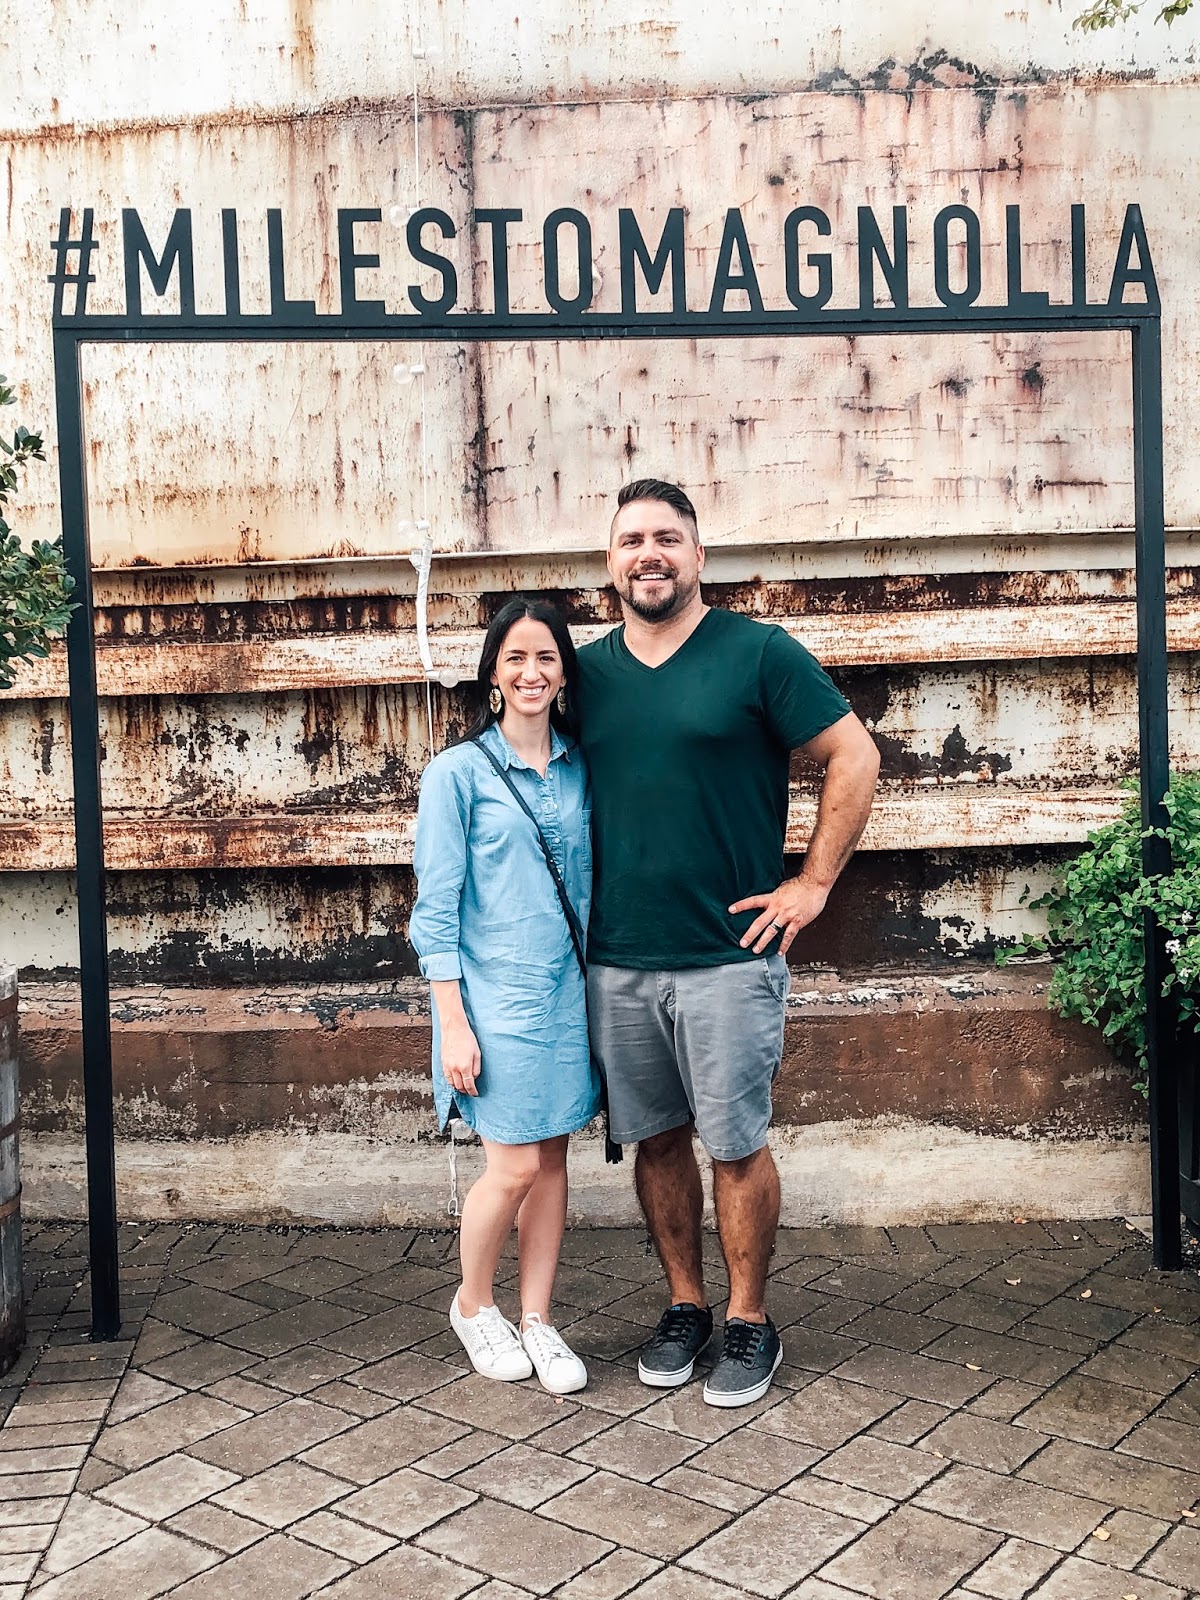 How to Dress for the Magnolia Market